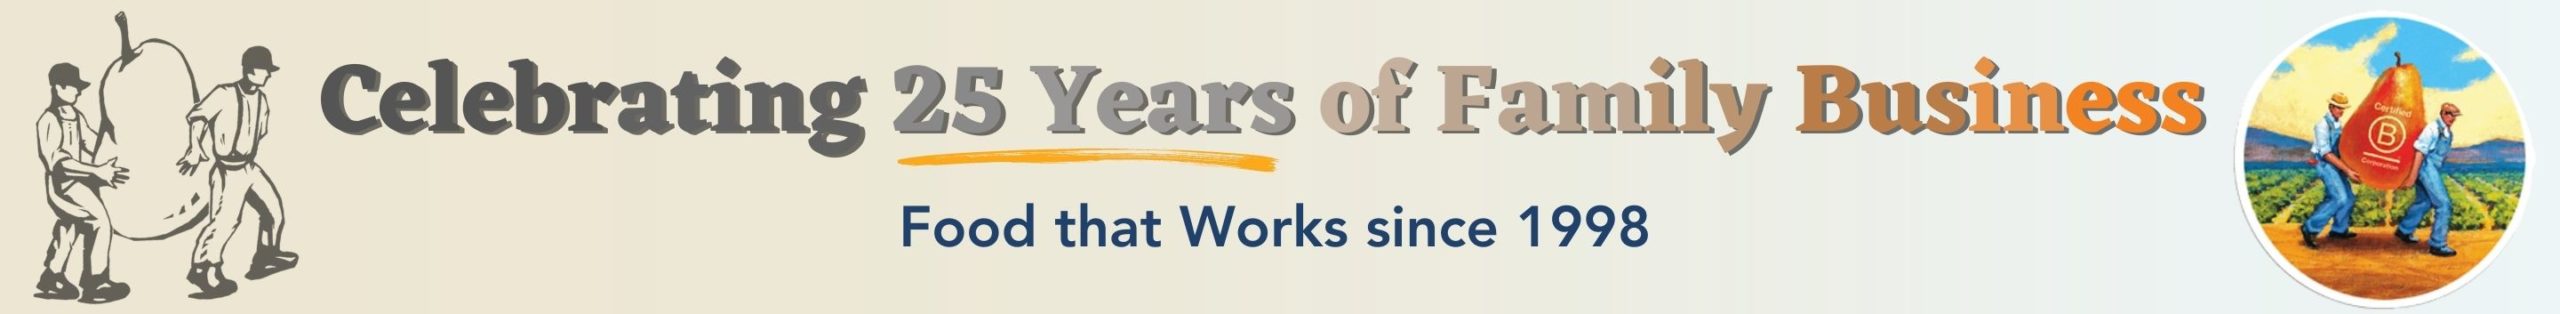 Banner with caption: Celebrating 25 Years of Family Business - Food that Works since 1998"